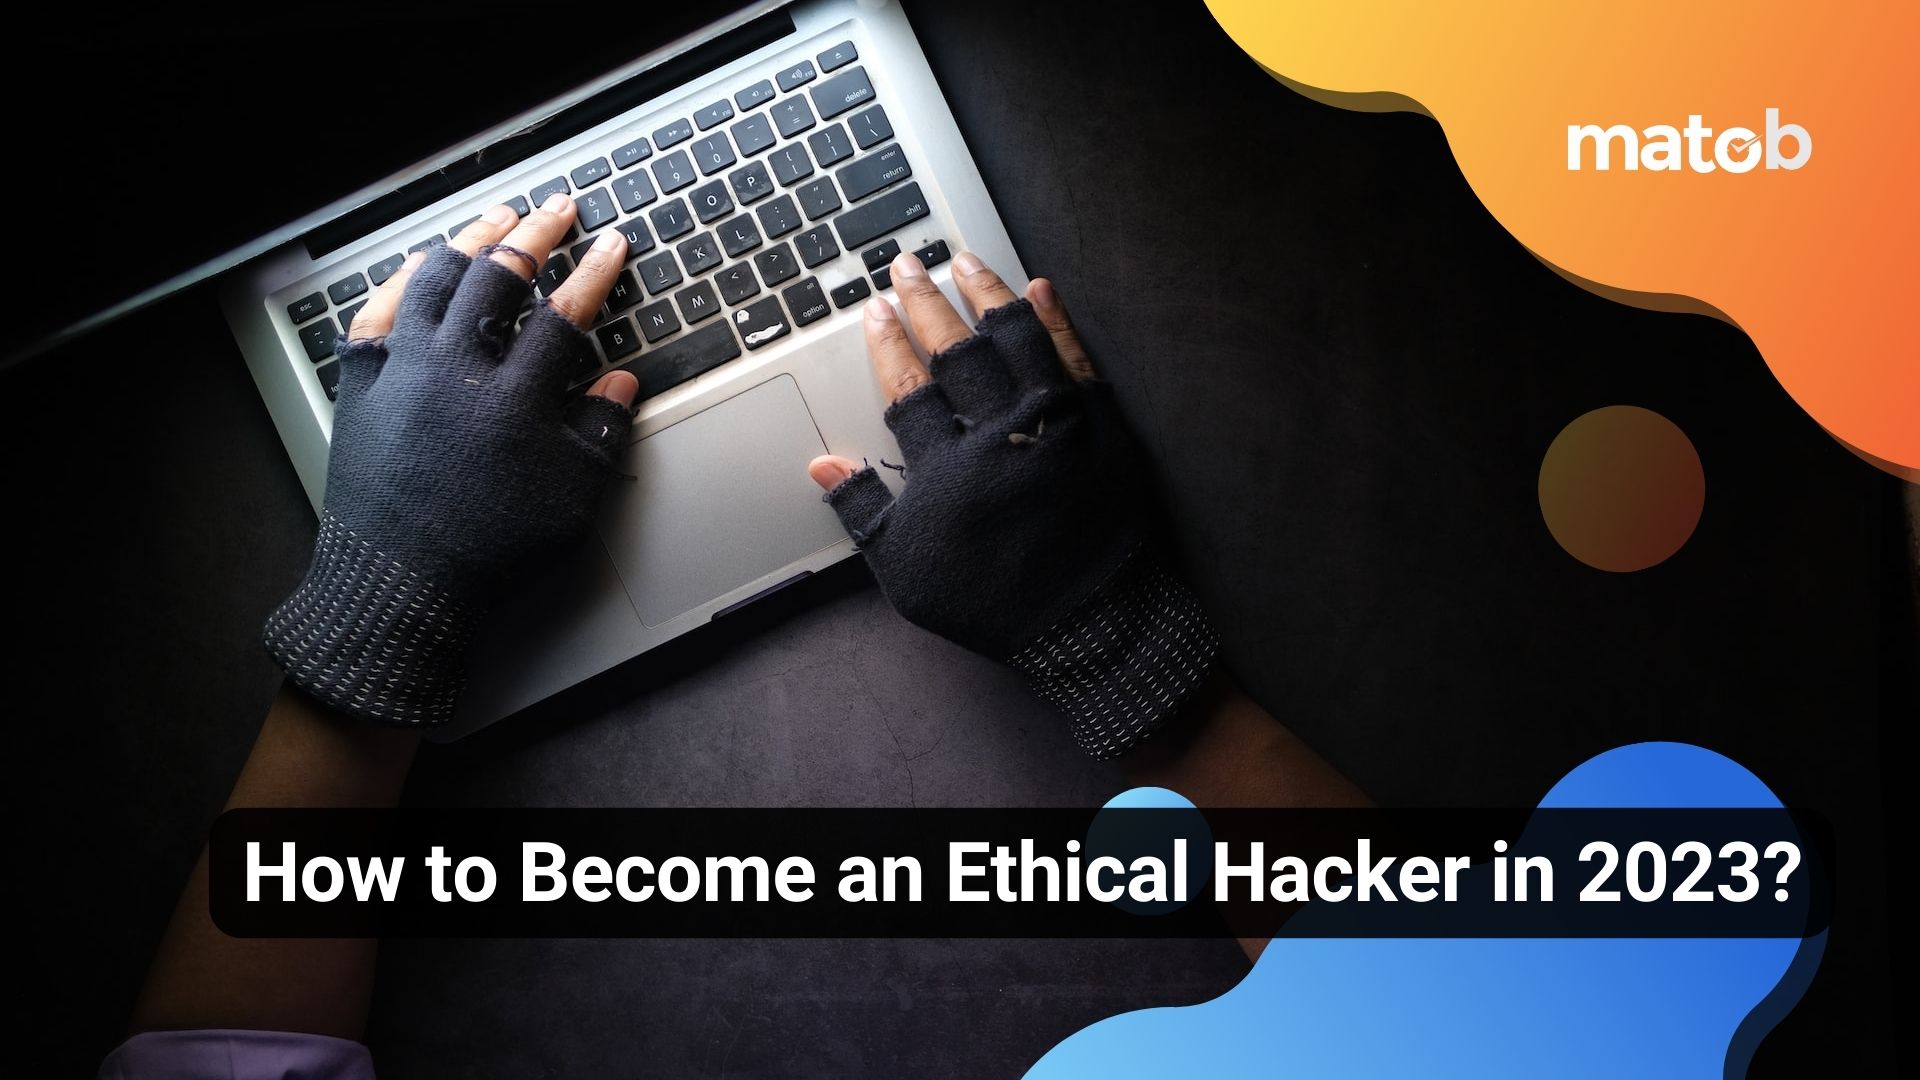 How to Become an Ethical Hacker in 2023?